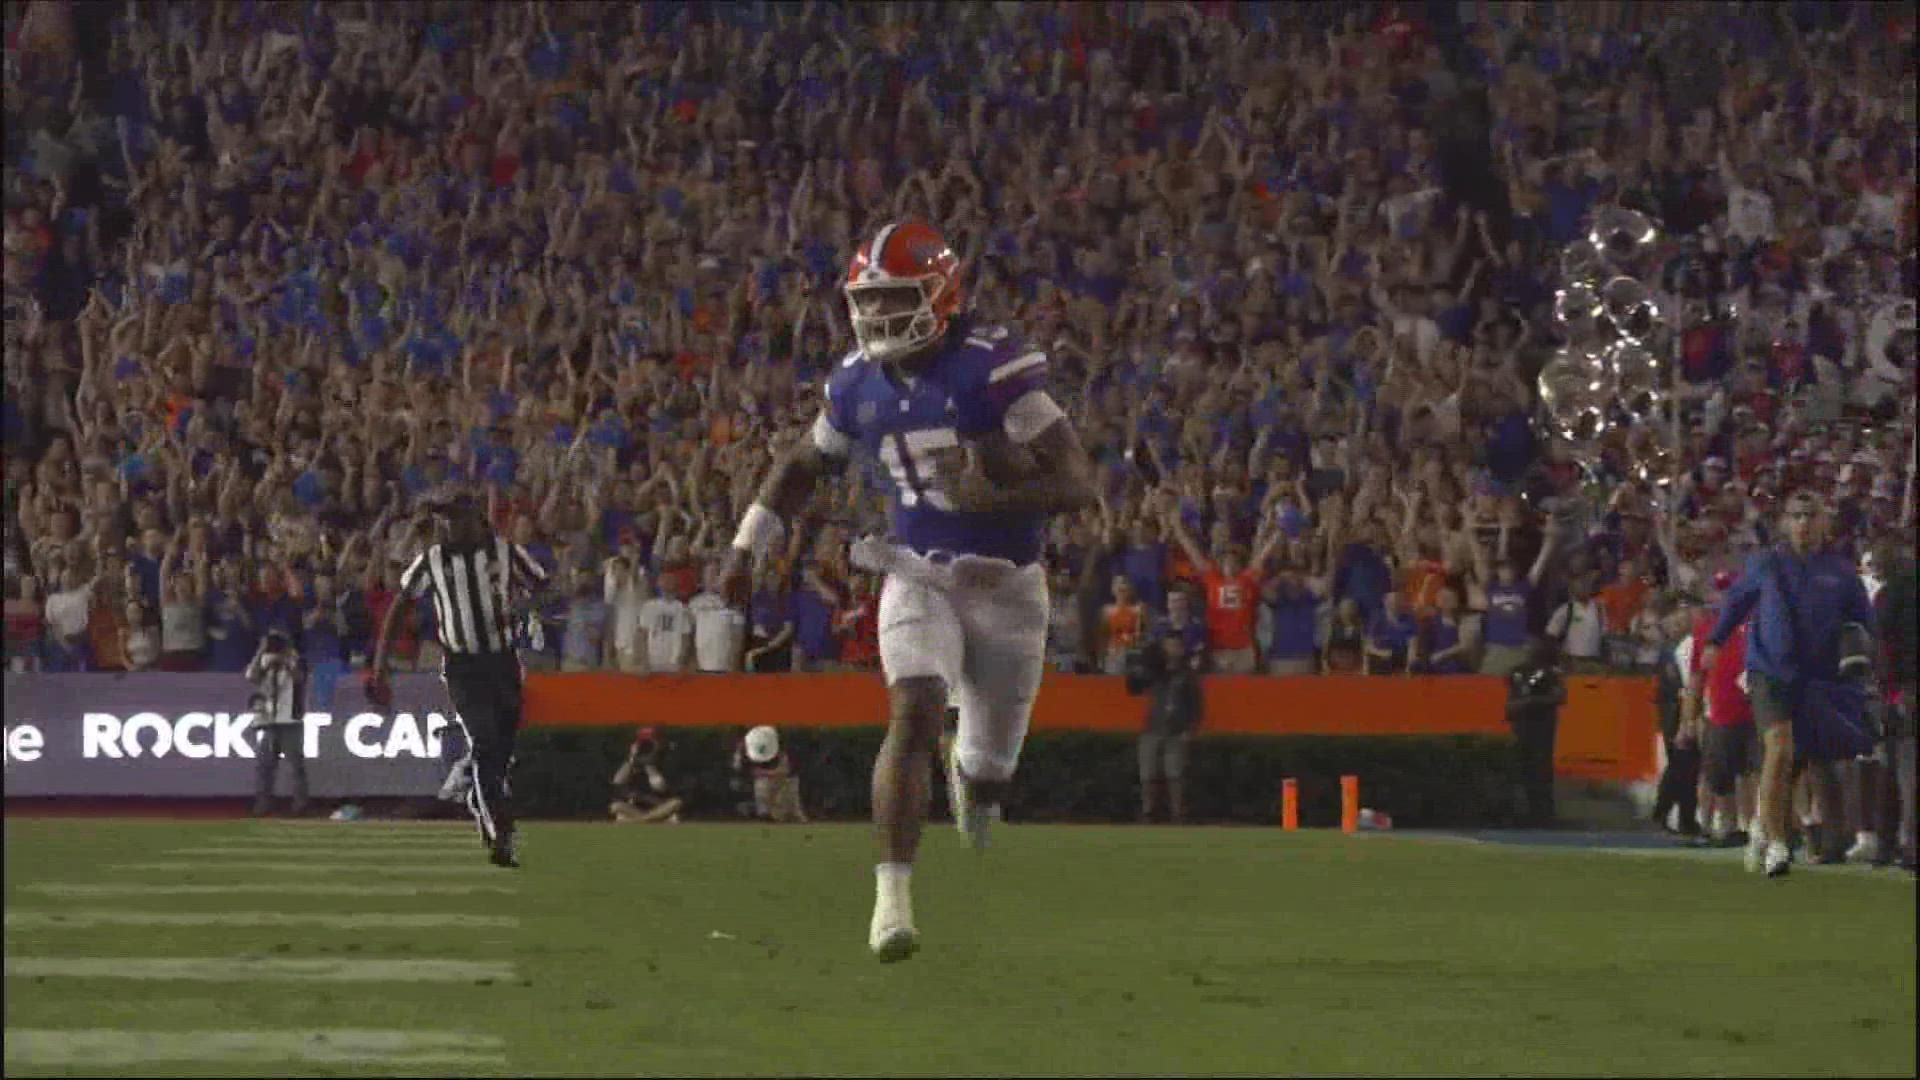 In the Gators last two games Richardson had spotty performances and he's yet to throw a touchdown pass.